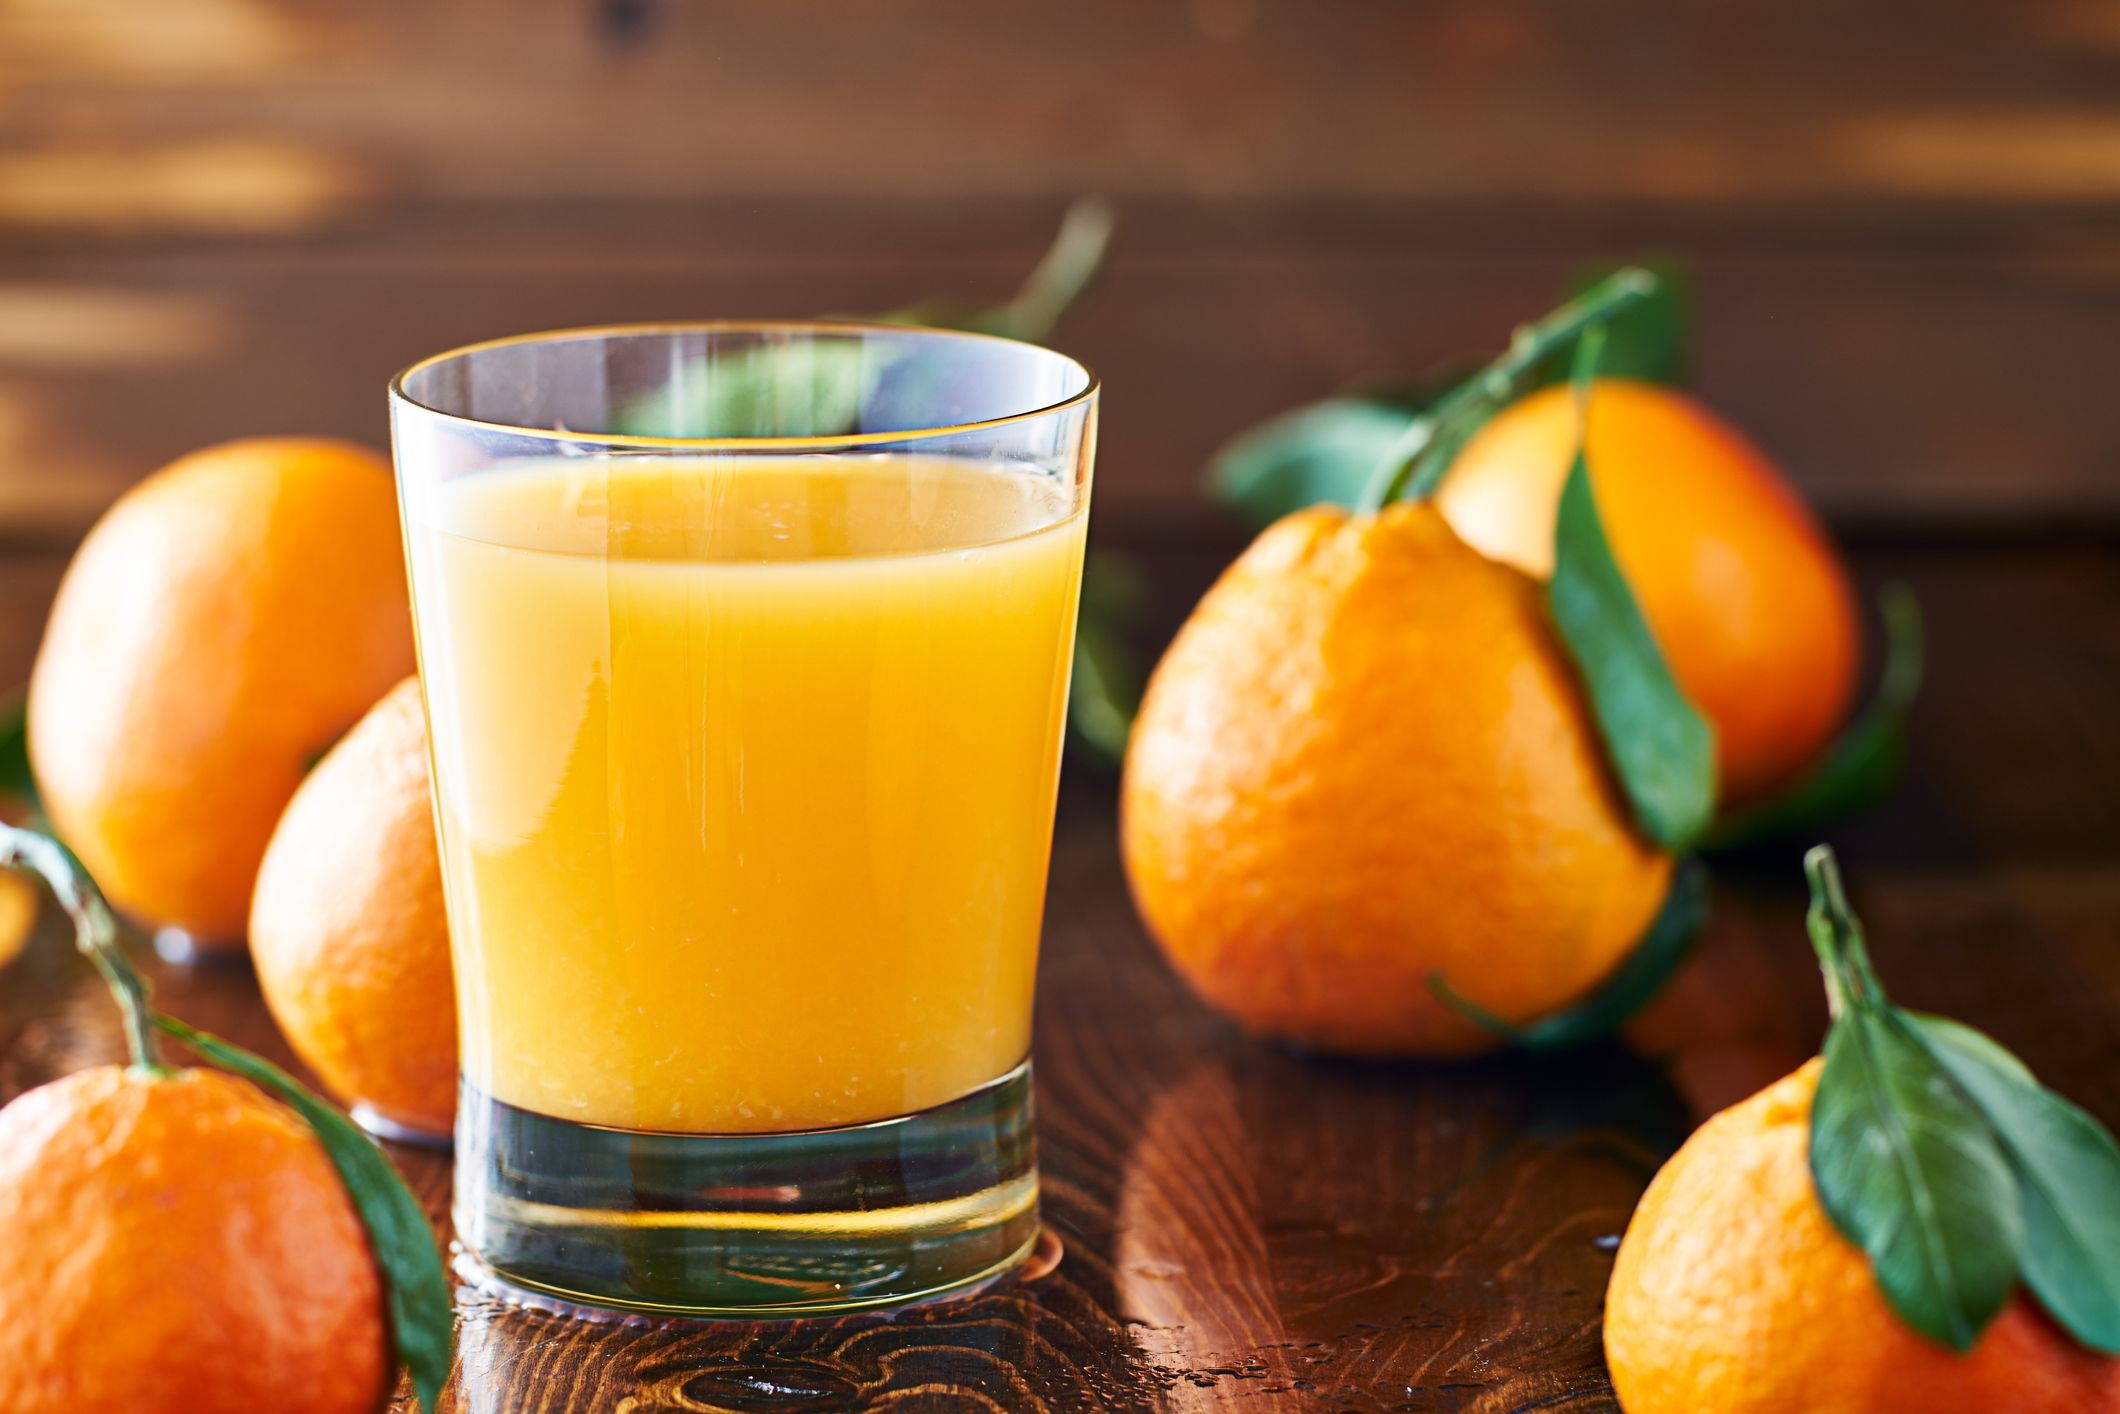 How Many Calories Is A Glass Of Orange Juice